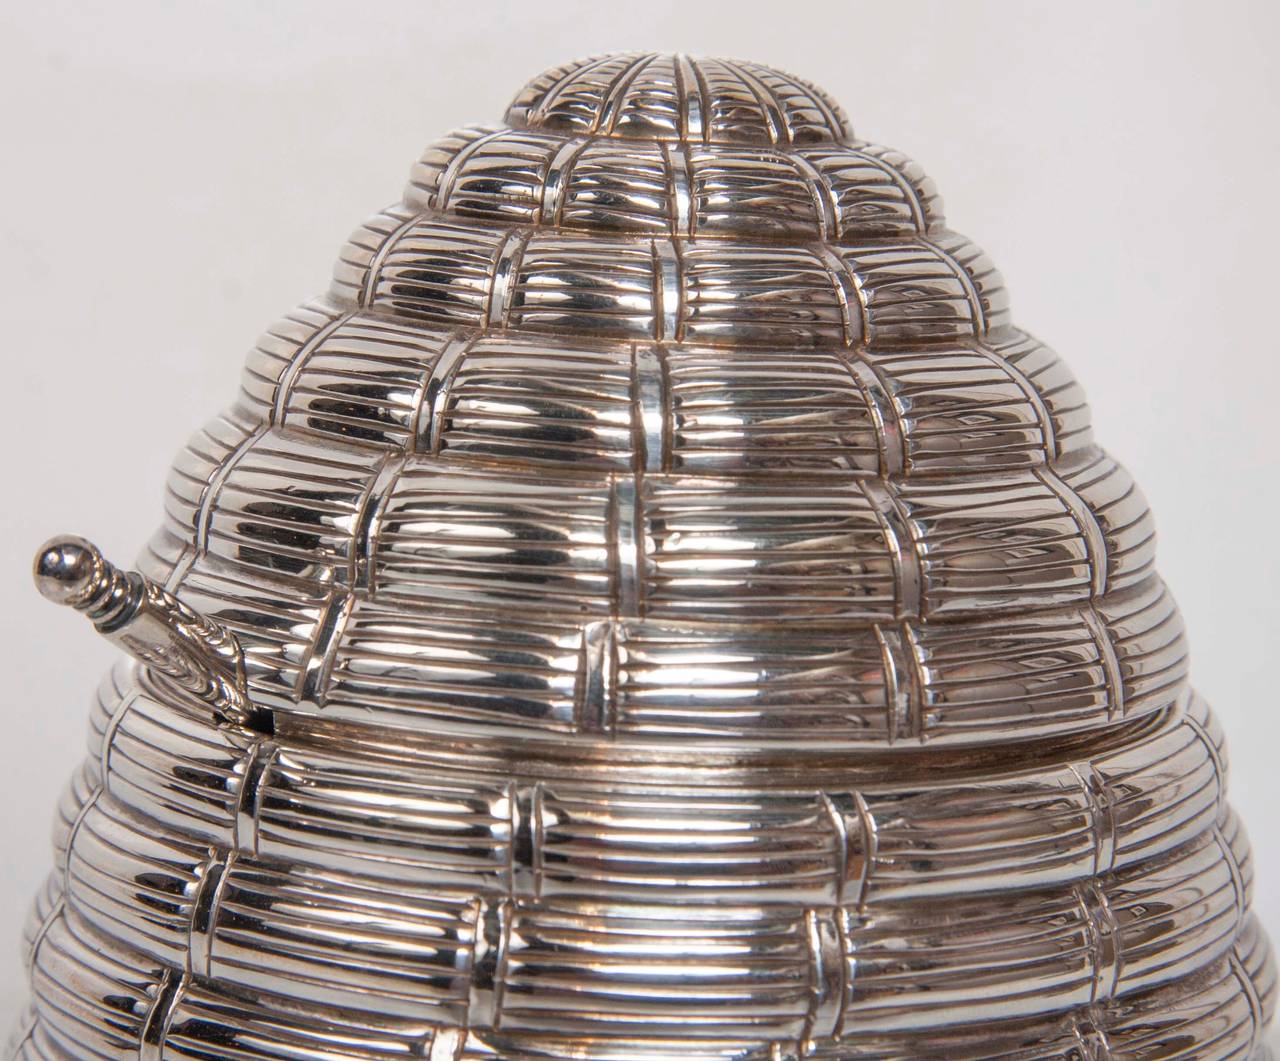 A Tiffany sterling silver honey pot with spoon in beehive form.